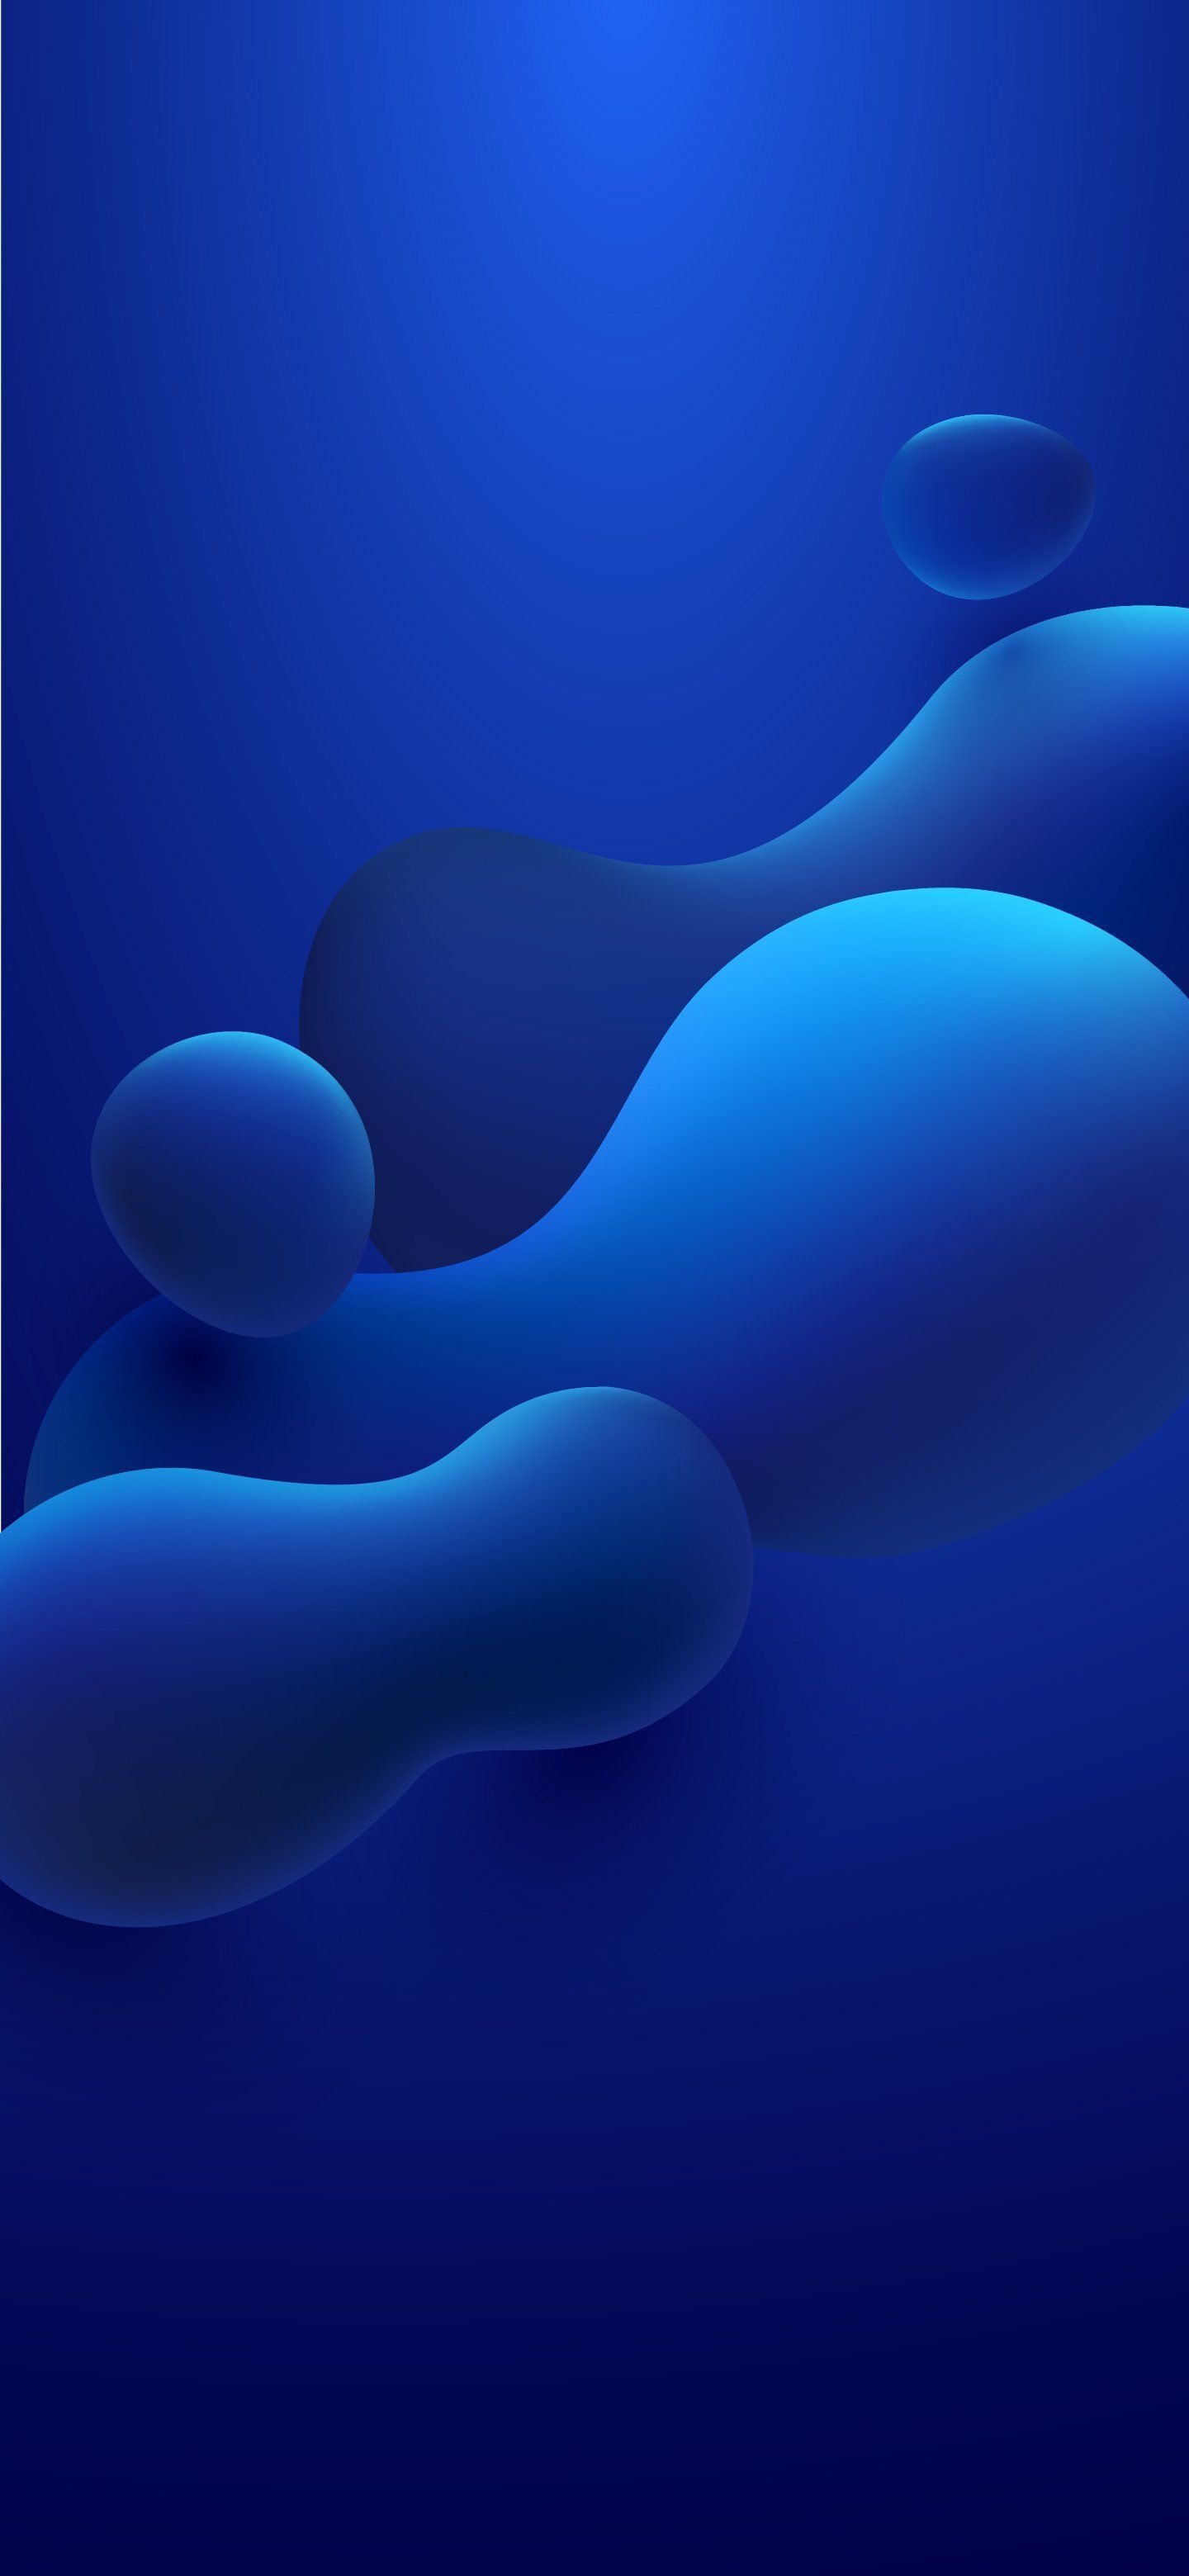 iPhone 11 Wallpaper iOS abstract blue 4K HD Download Free. HD Wallpaper &. D. Color wallpaper iphone, Huawei wallpaper, Blue background wallpaper